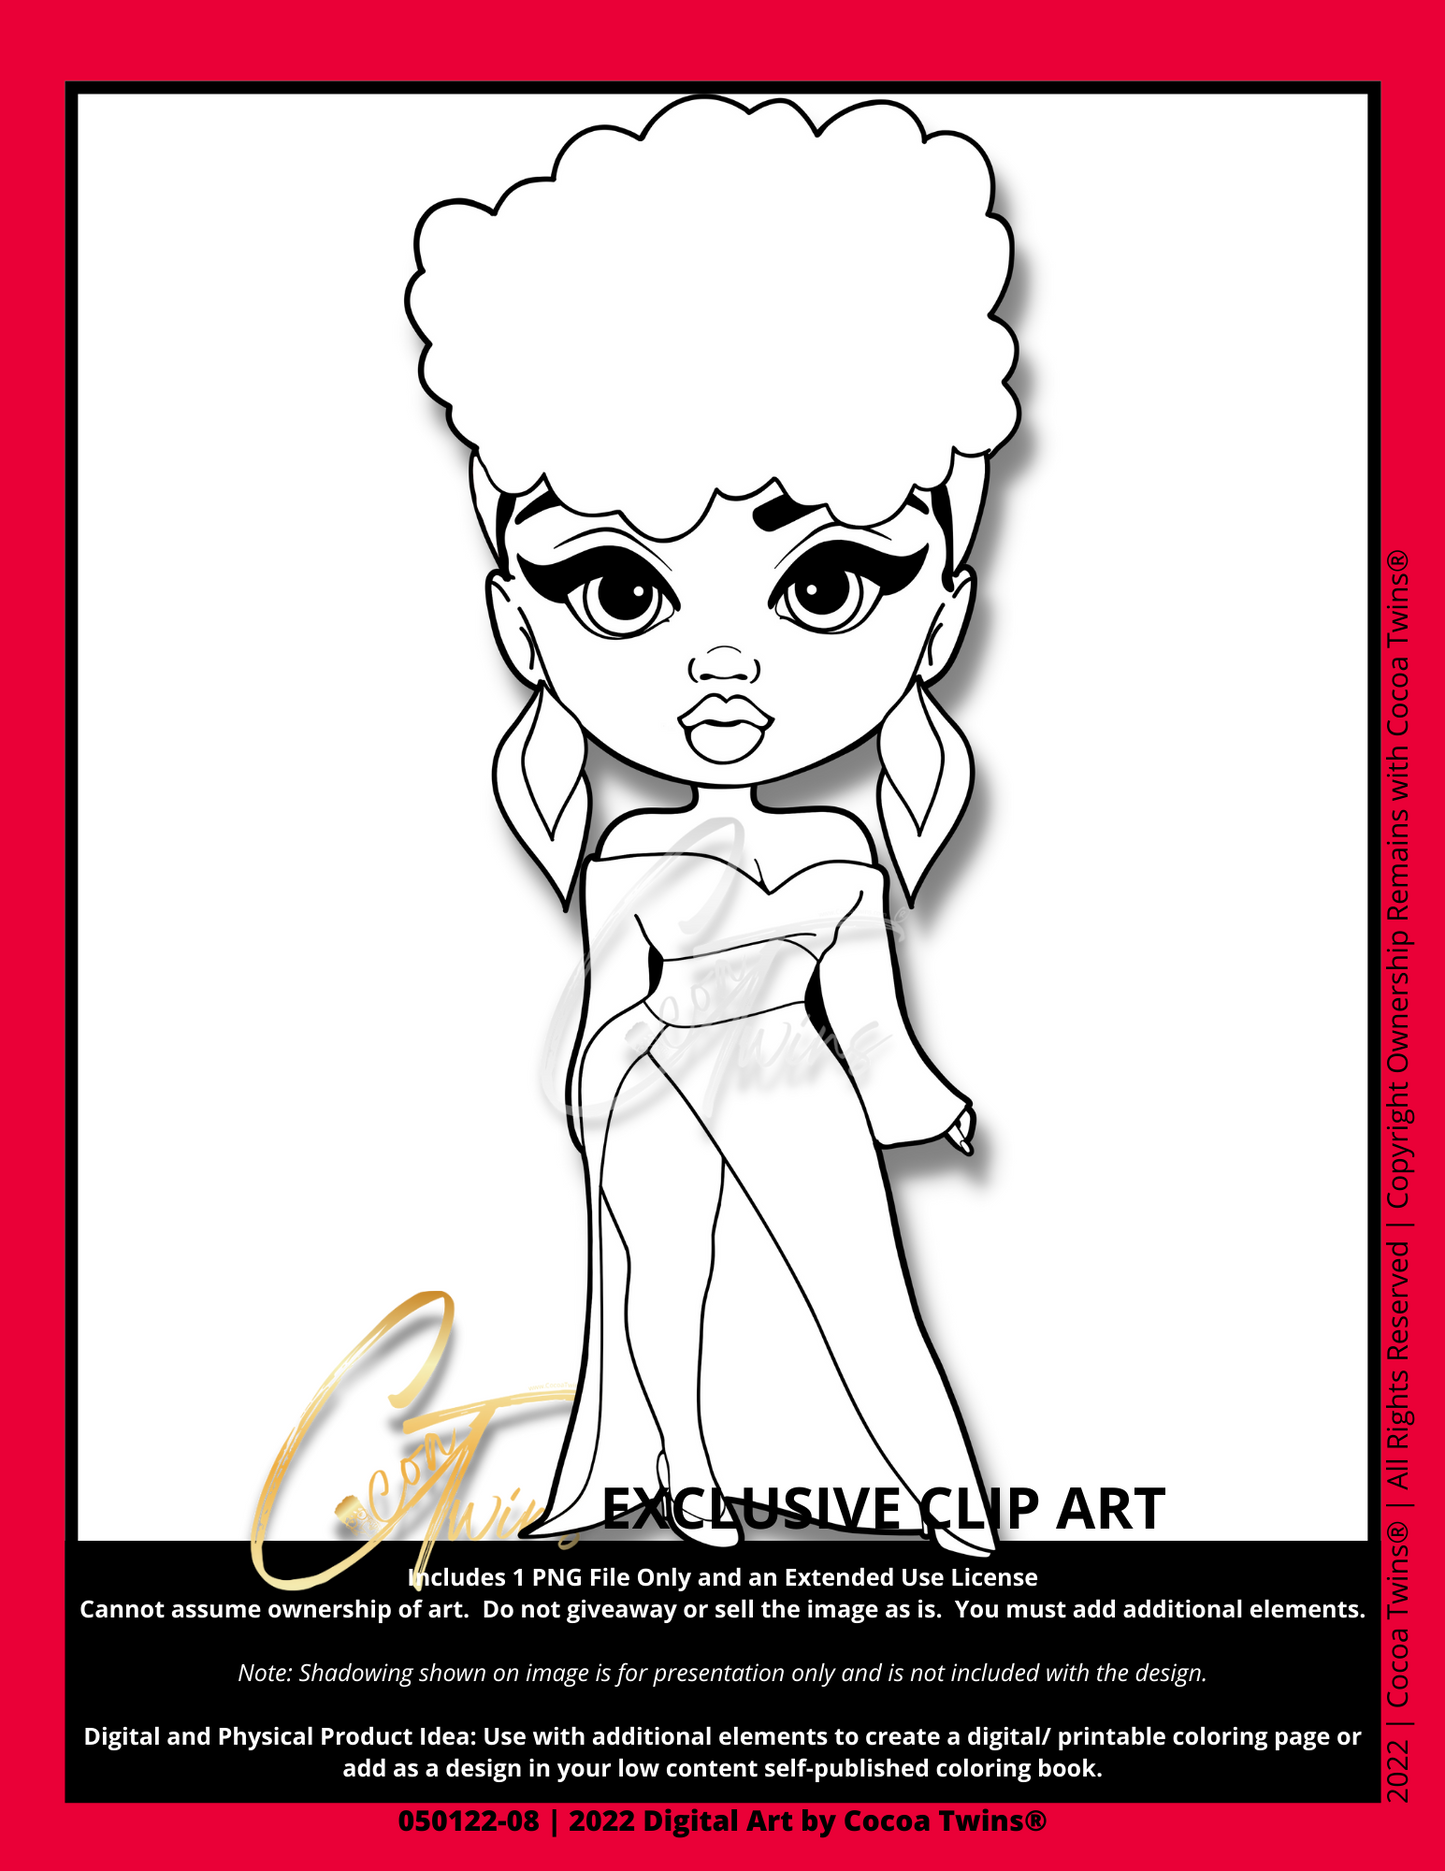 051222-08 | Exclusive Digital Clip Art with an Extended Use License | Limited Quantities